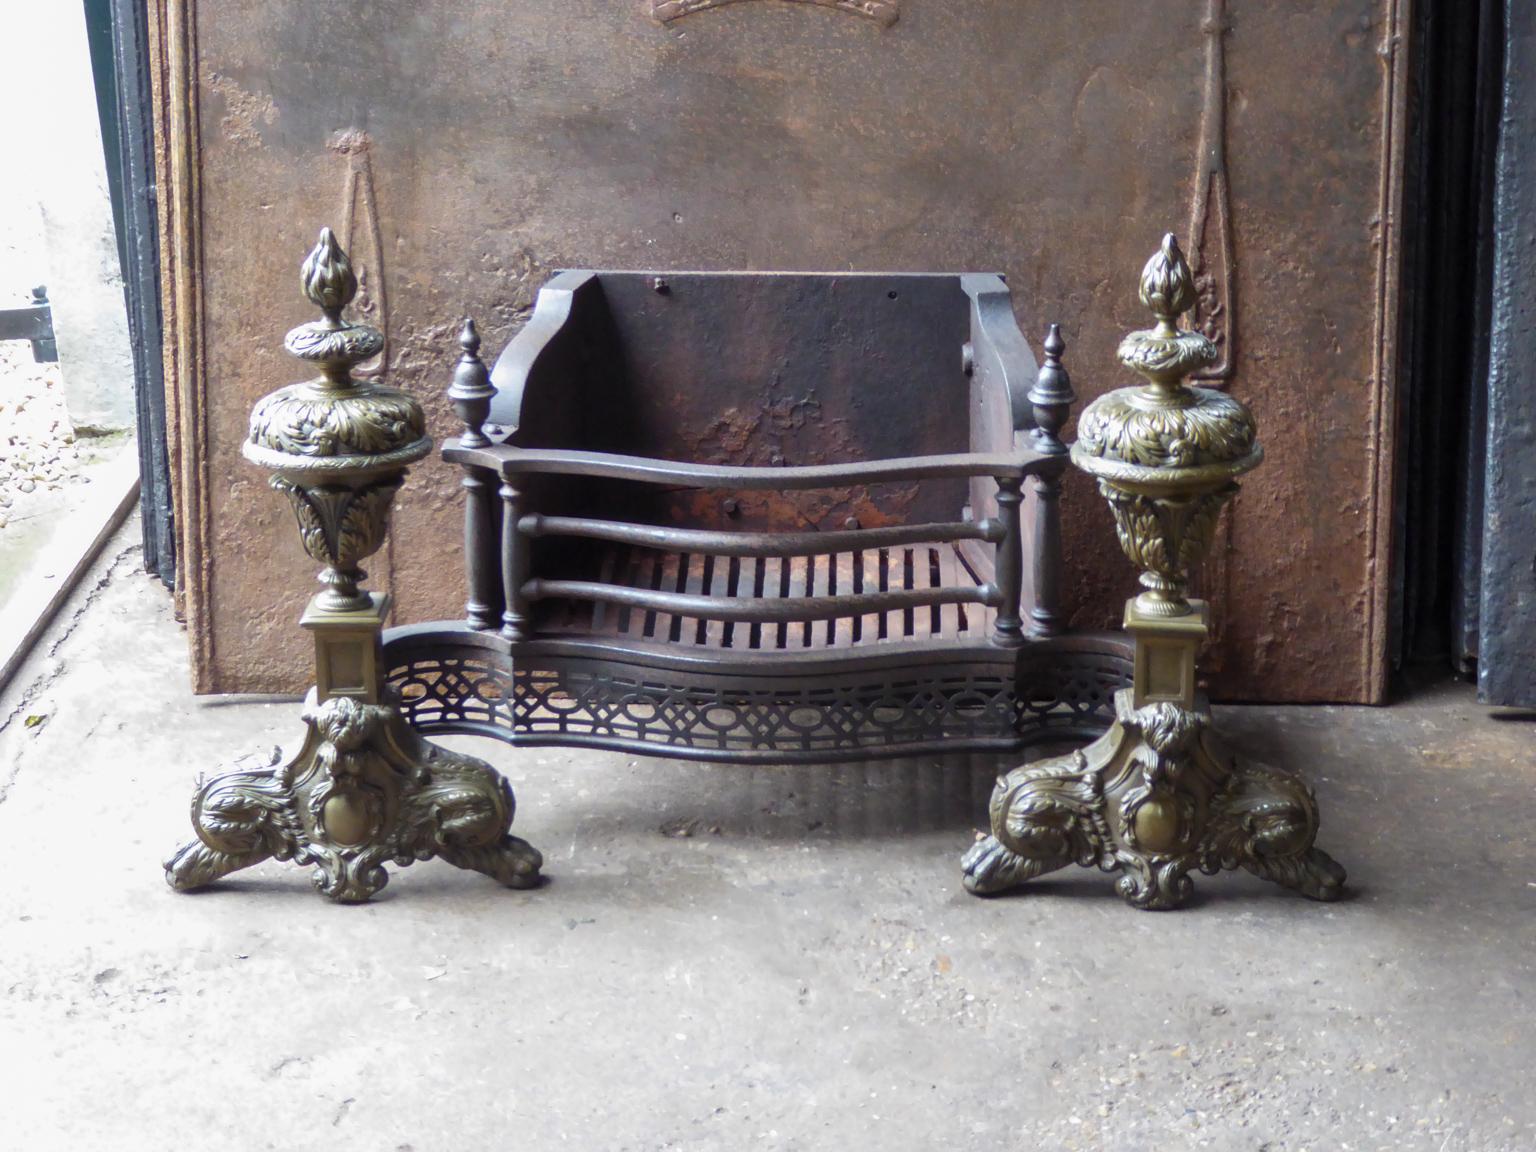 English Victorian style fireplace basket or fire basket. The fireplace grate is made of cast iron, wrought iron and brass. The total width of the front of the grate is 37.4 inch (95 cm).

















